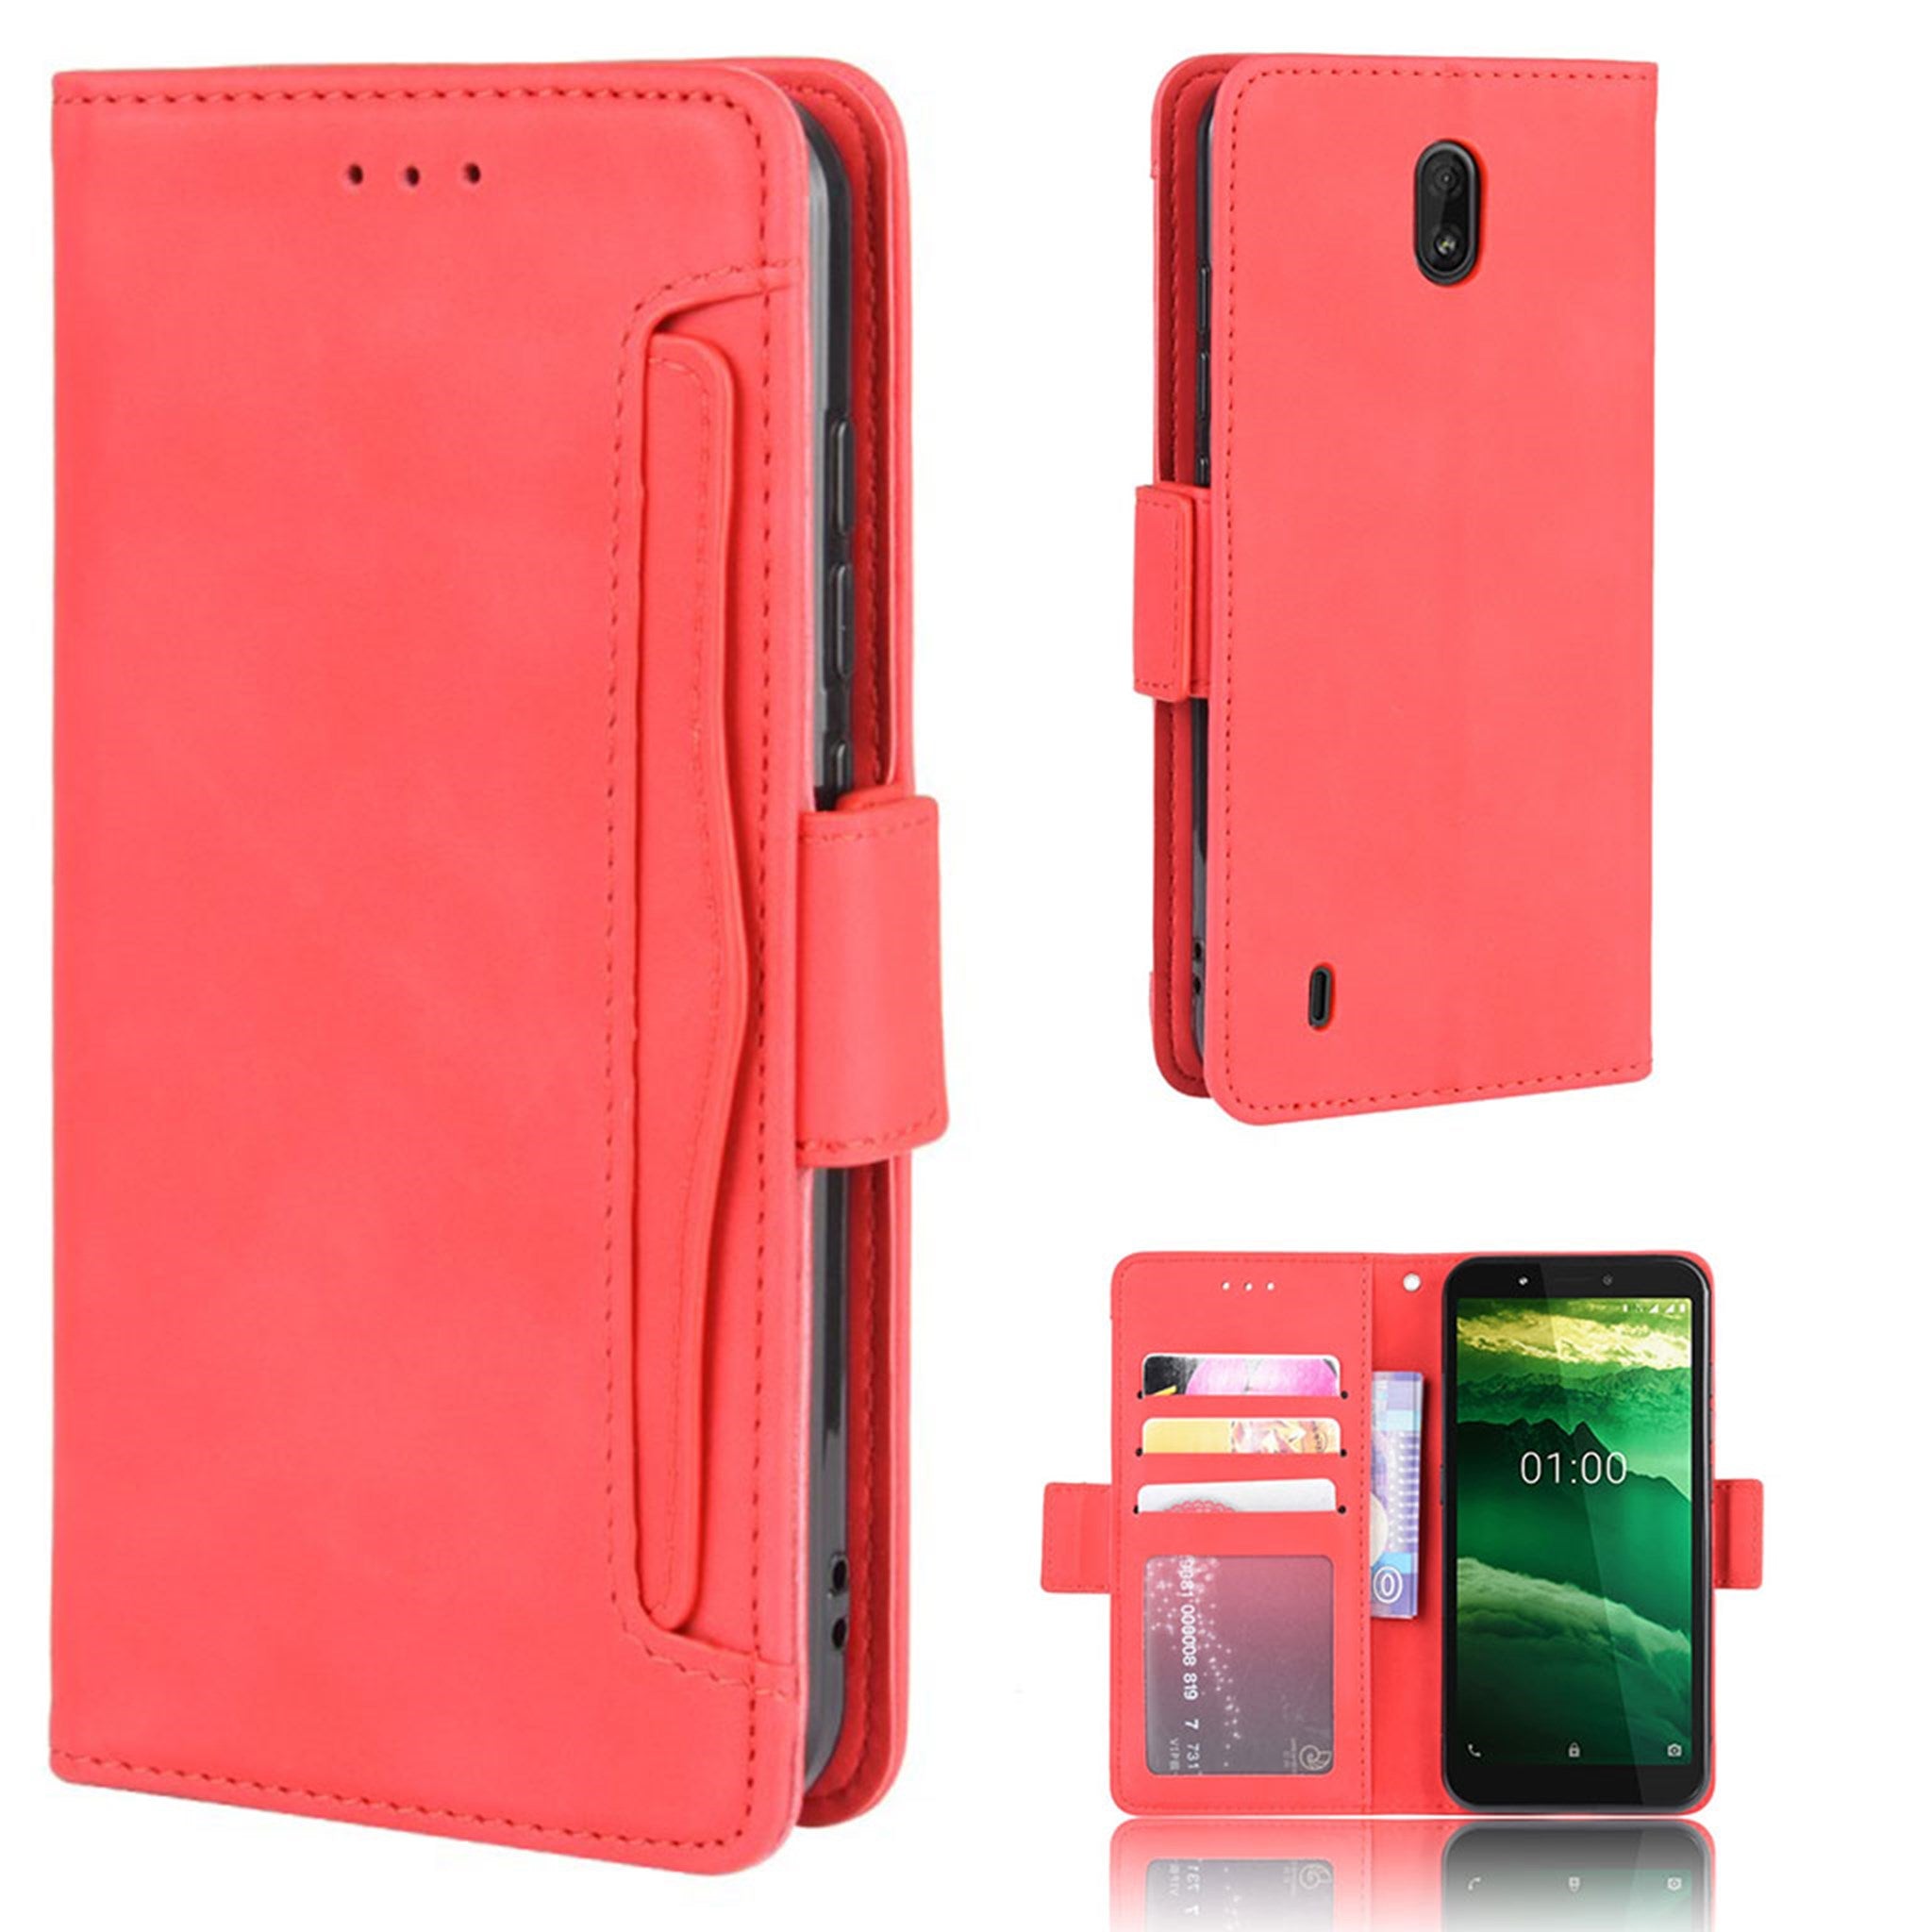 Modern-styled leather wallet case for Nokia C1 - Red